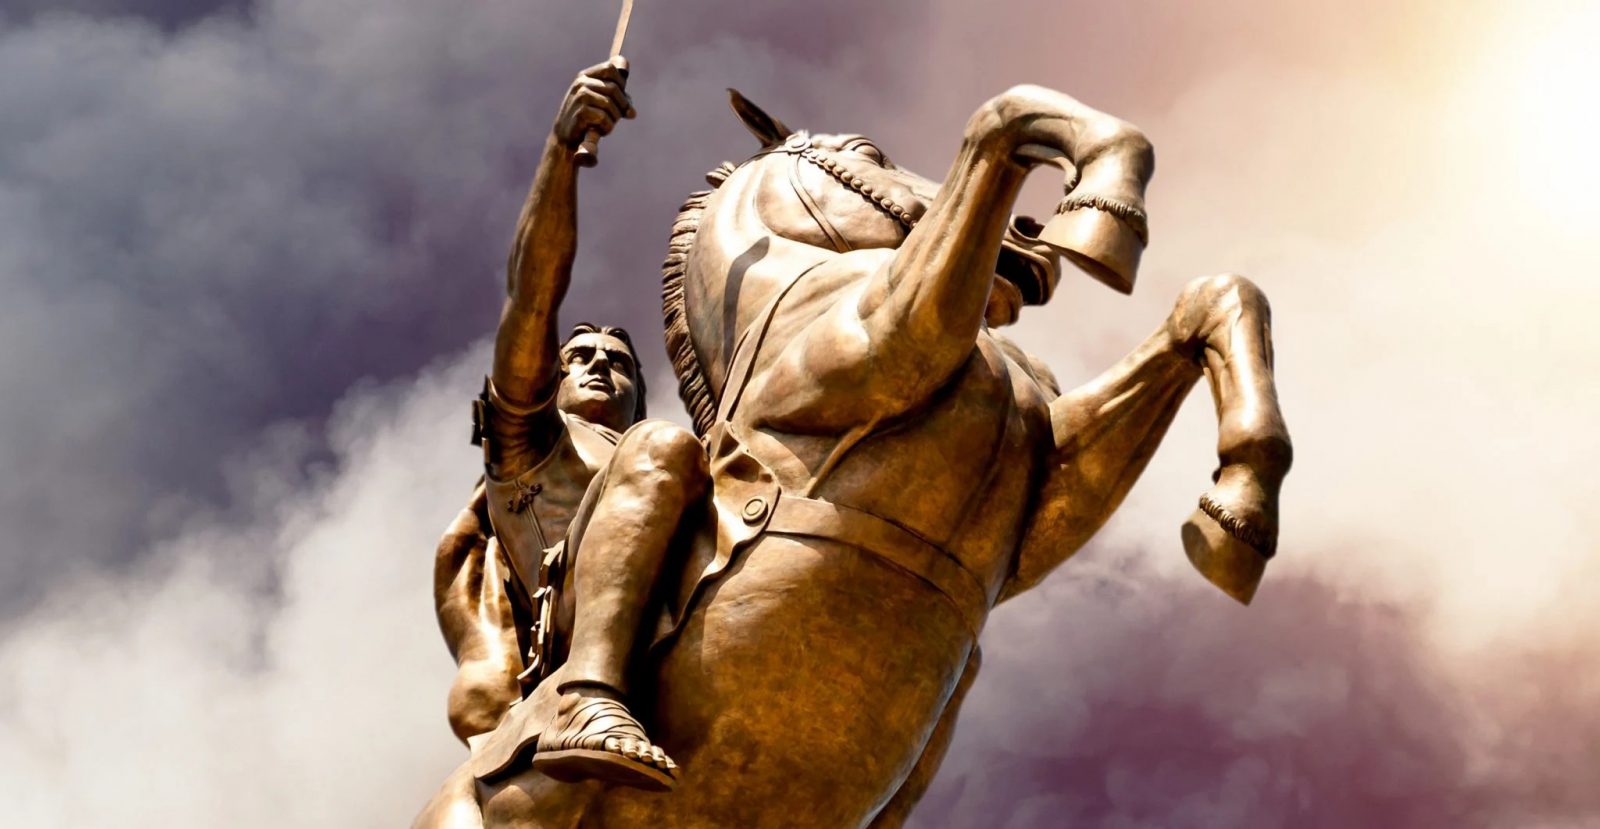 Can You Conquer All 7 Continents in This 30-Question Quiz? Alexander The Great